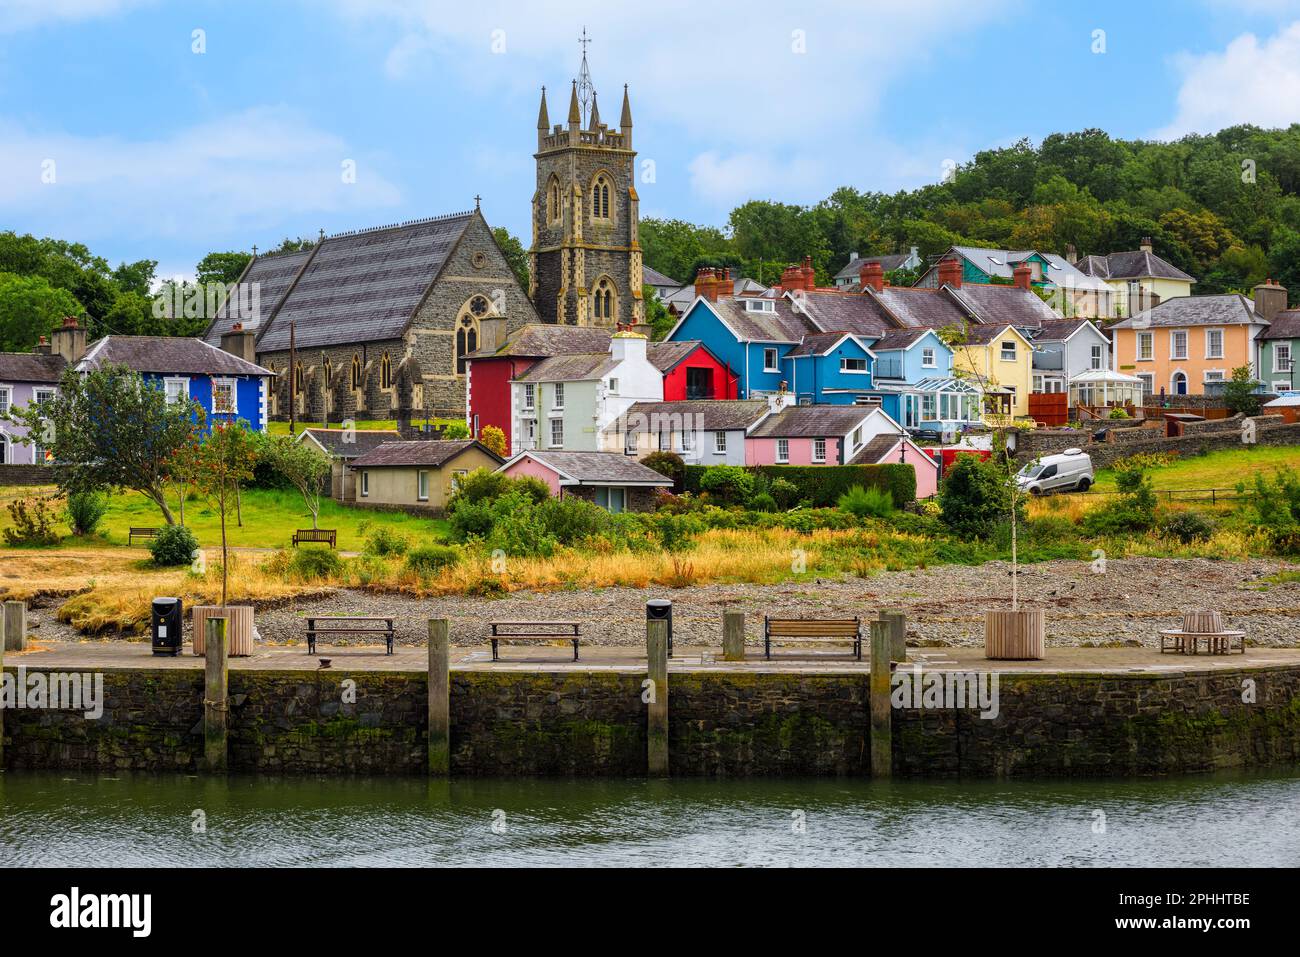 Traditional colorful houses and church in historical Aberystwyth town, a popular seaside resort in Wales, United Kingdom Stock Photo